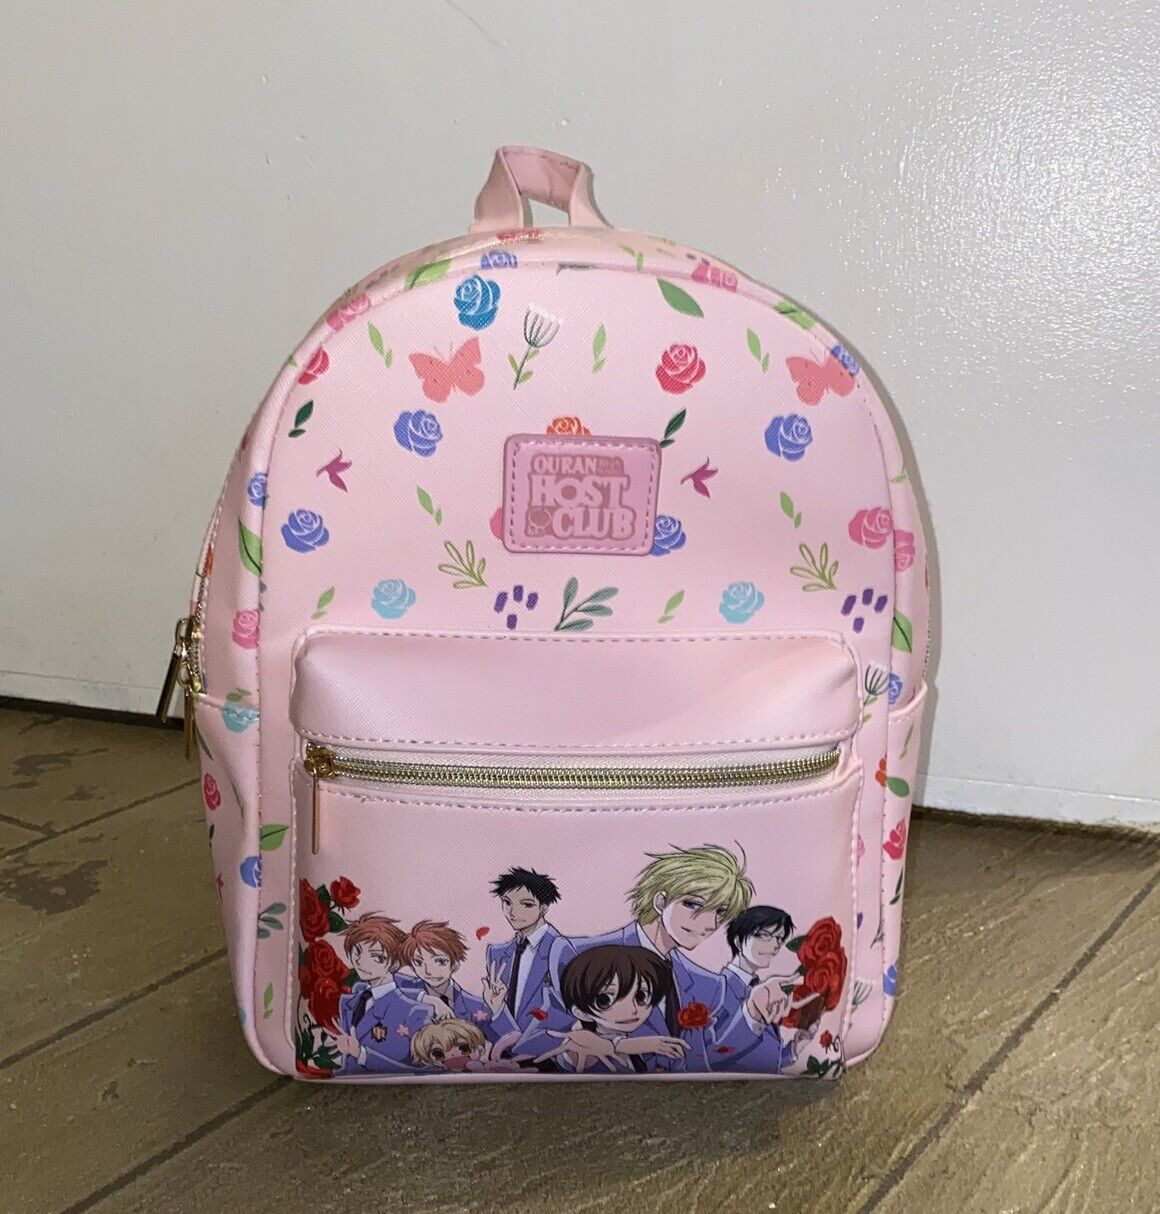 Ouran High School Host Club Pink Floral Mini Backpack